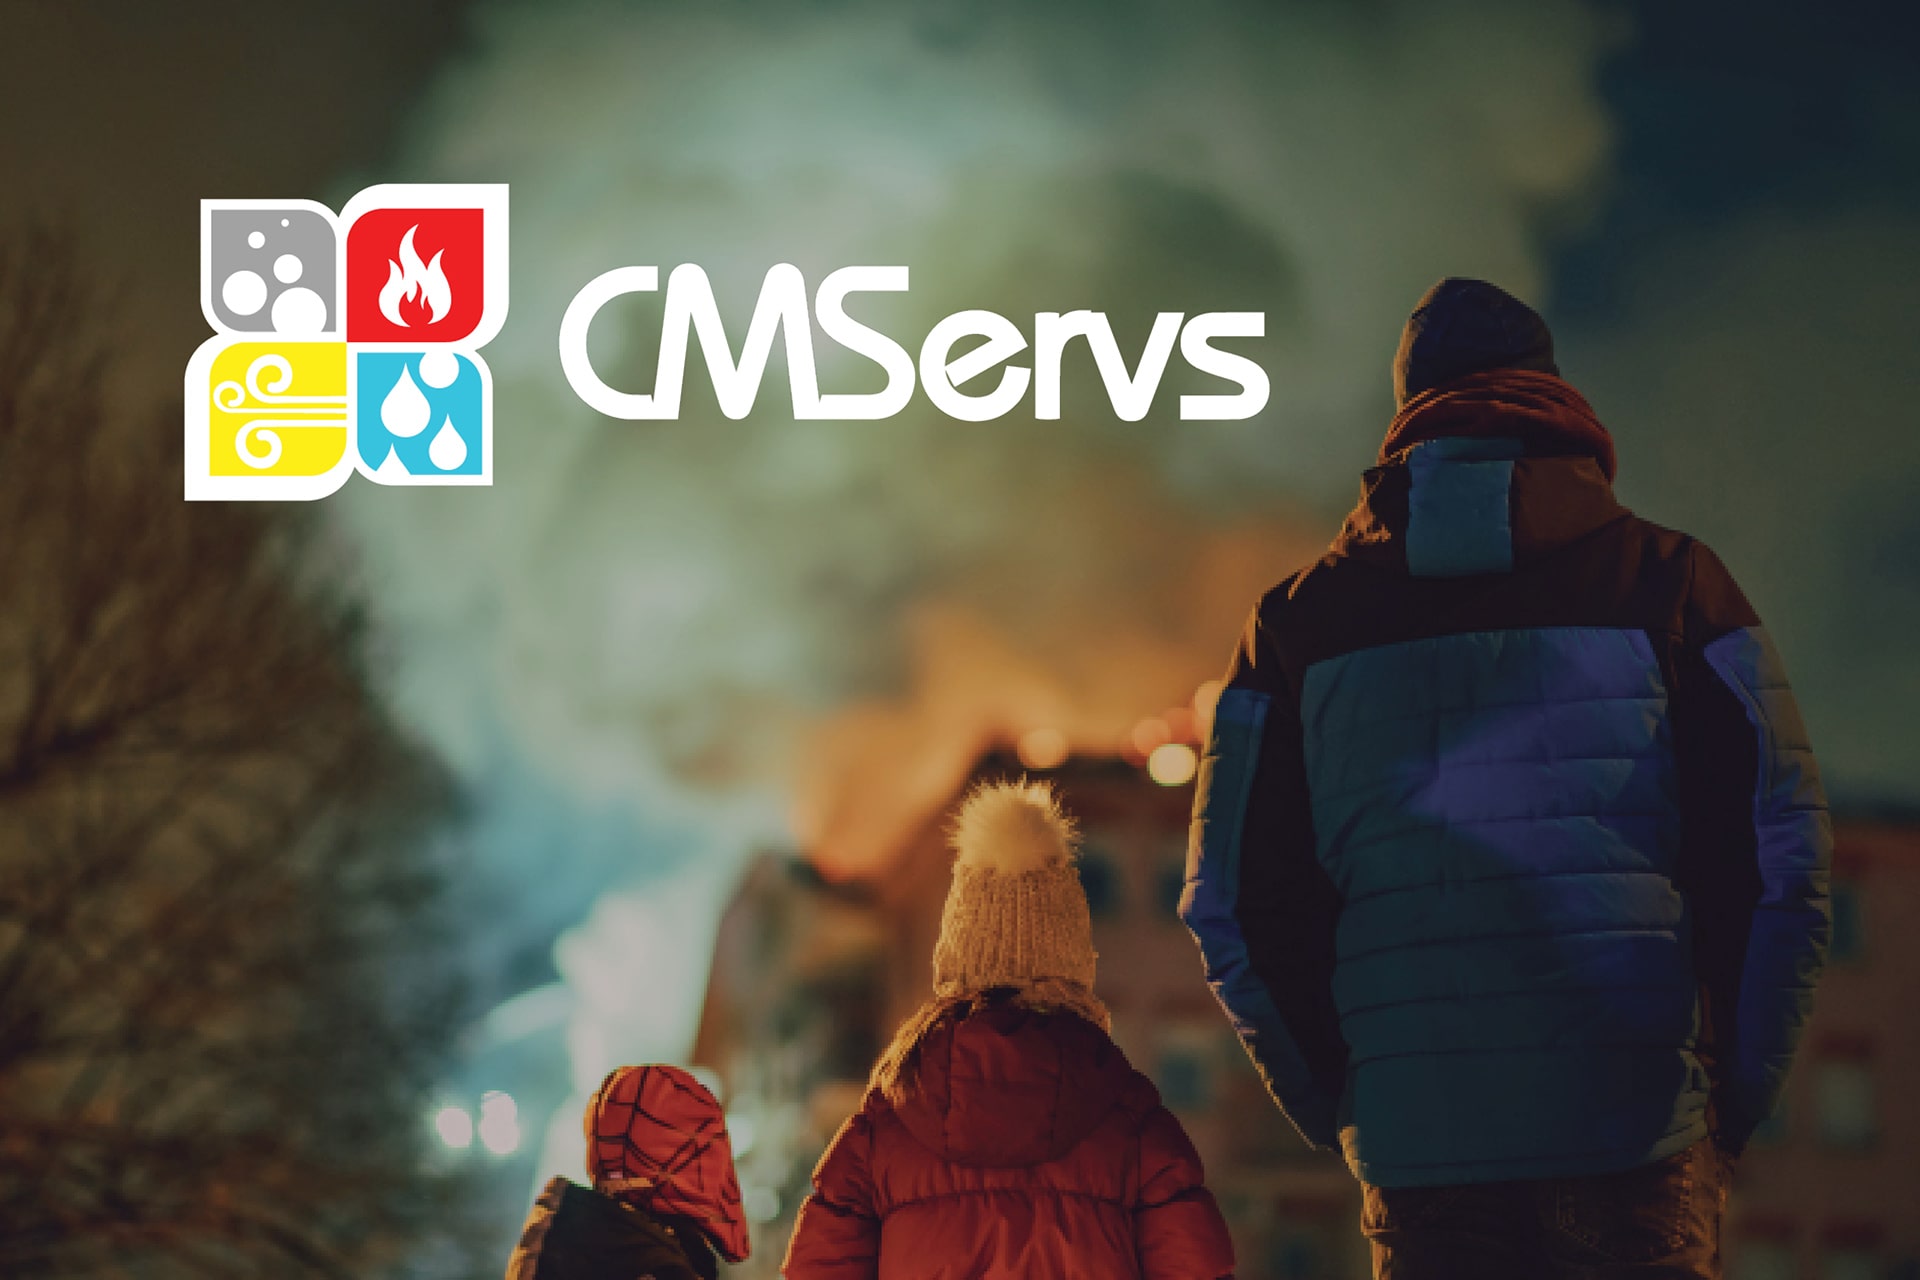 A family walking down a street at night, with the CMServs logo visible.